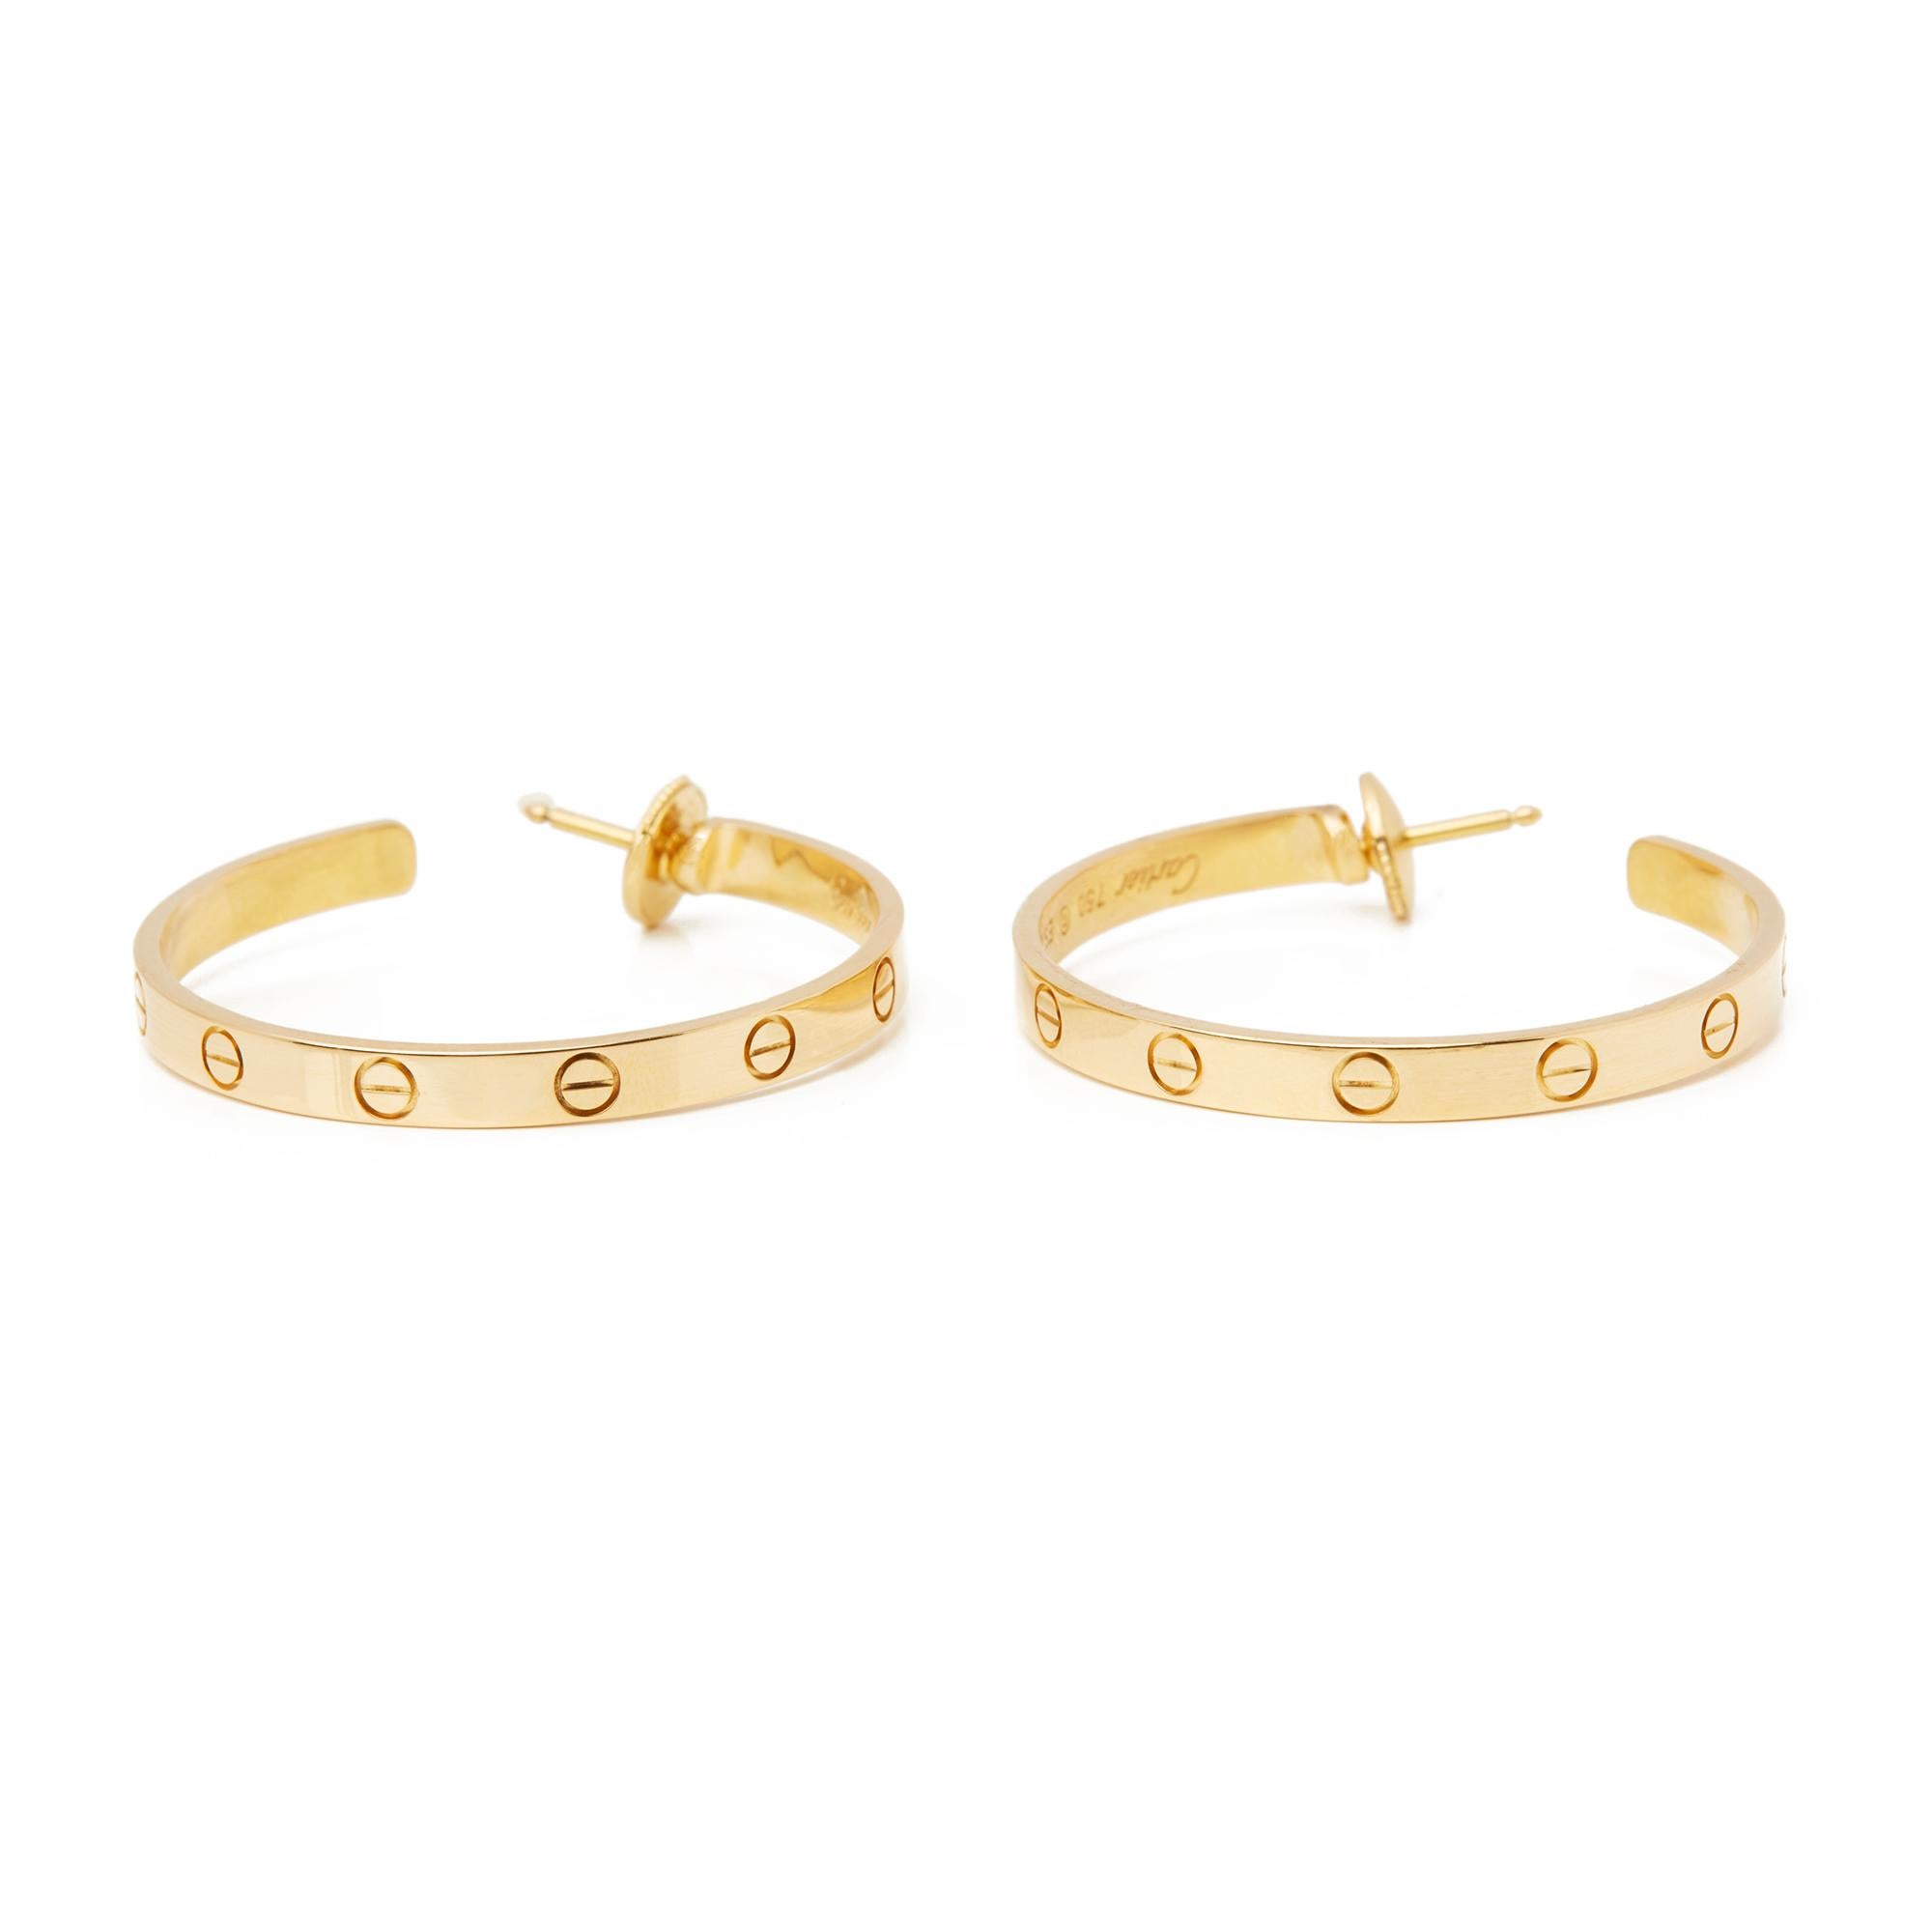 Code: COM2058
Brand: Cartier
Description: 18k Yellow Gold Love Hoop Earrings
Accompanied With: Presentation Box
Gender: Ladies
Earring Length: 3.5cm
Earring Width: 3mm
Earring Back: Lock
Condition: 8.5
Material: Yellow Gold
Total Weight: 21.25g